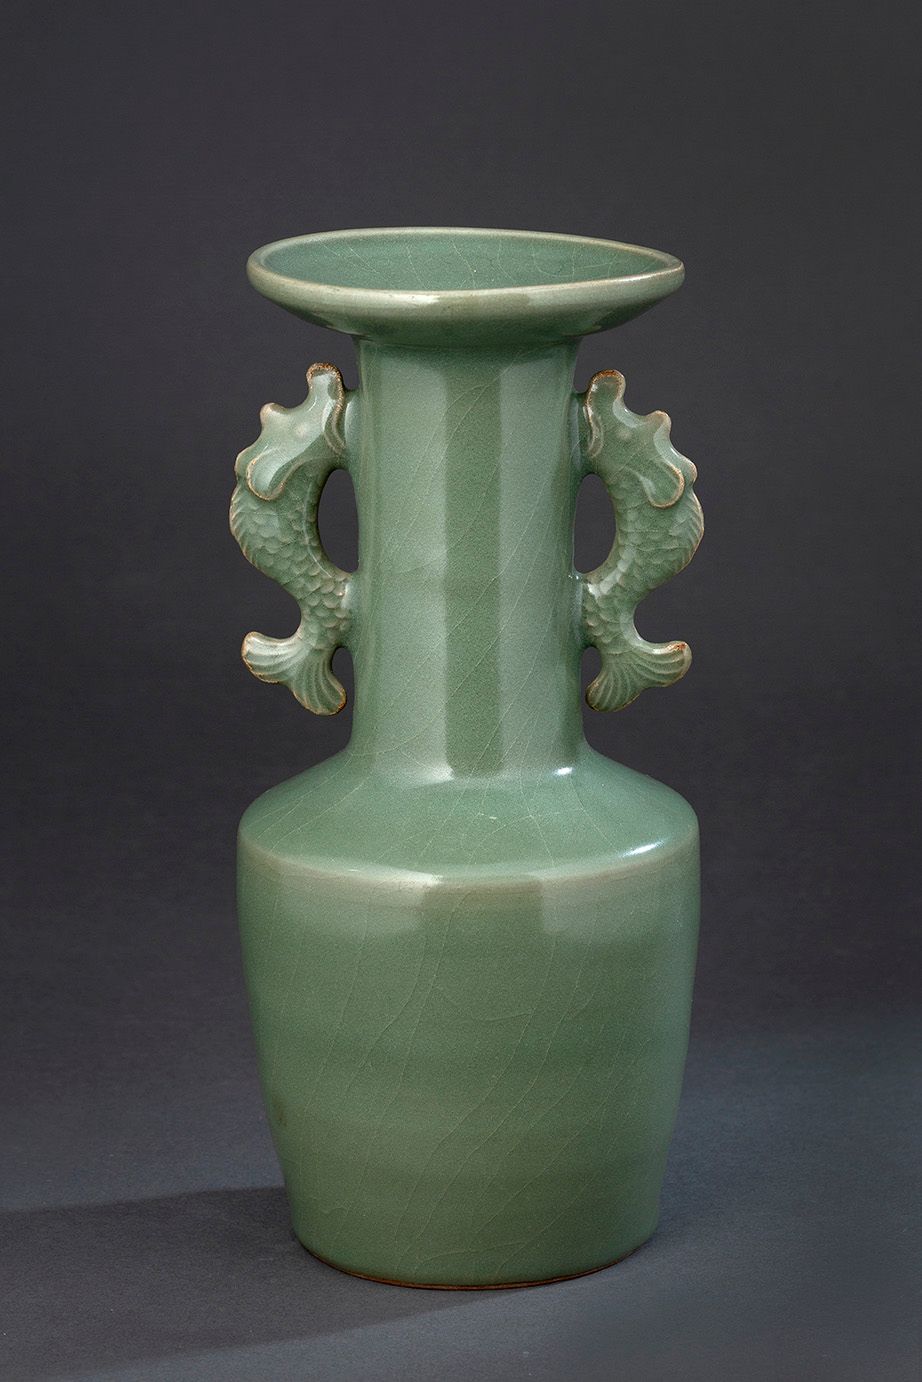 CHINE, FOURS DE LONGQUAN XIIIe SIÈCLE = Vase in Form eines Holzhammers.
Aus sela&hellip;